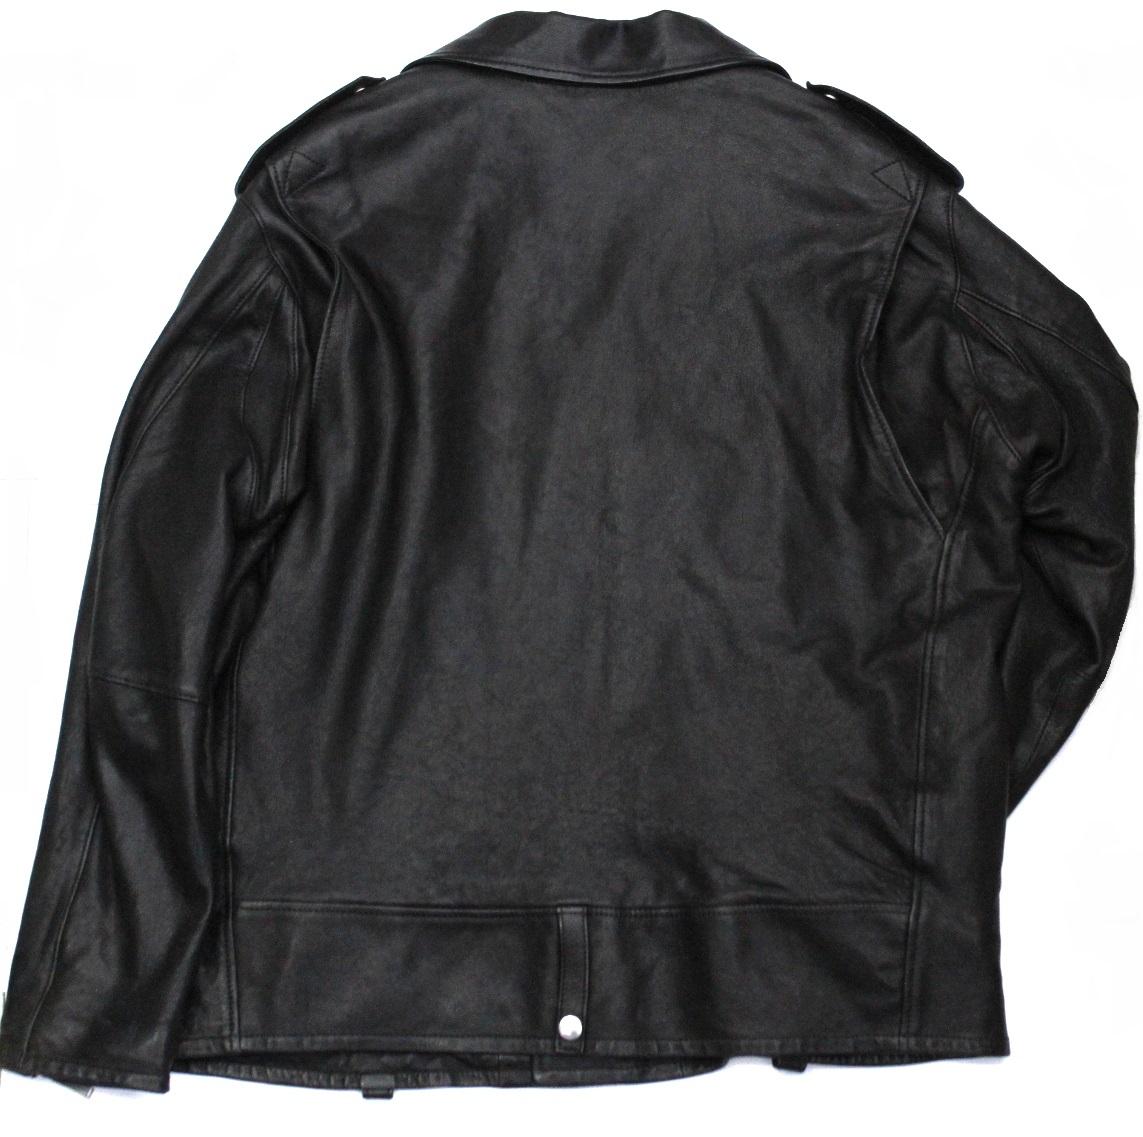 Saint Laurent black leather jacket with silver hardware.
Zip closure. Size 50, soft fit.
Very good condition.